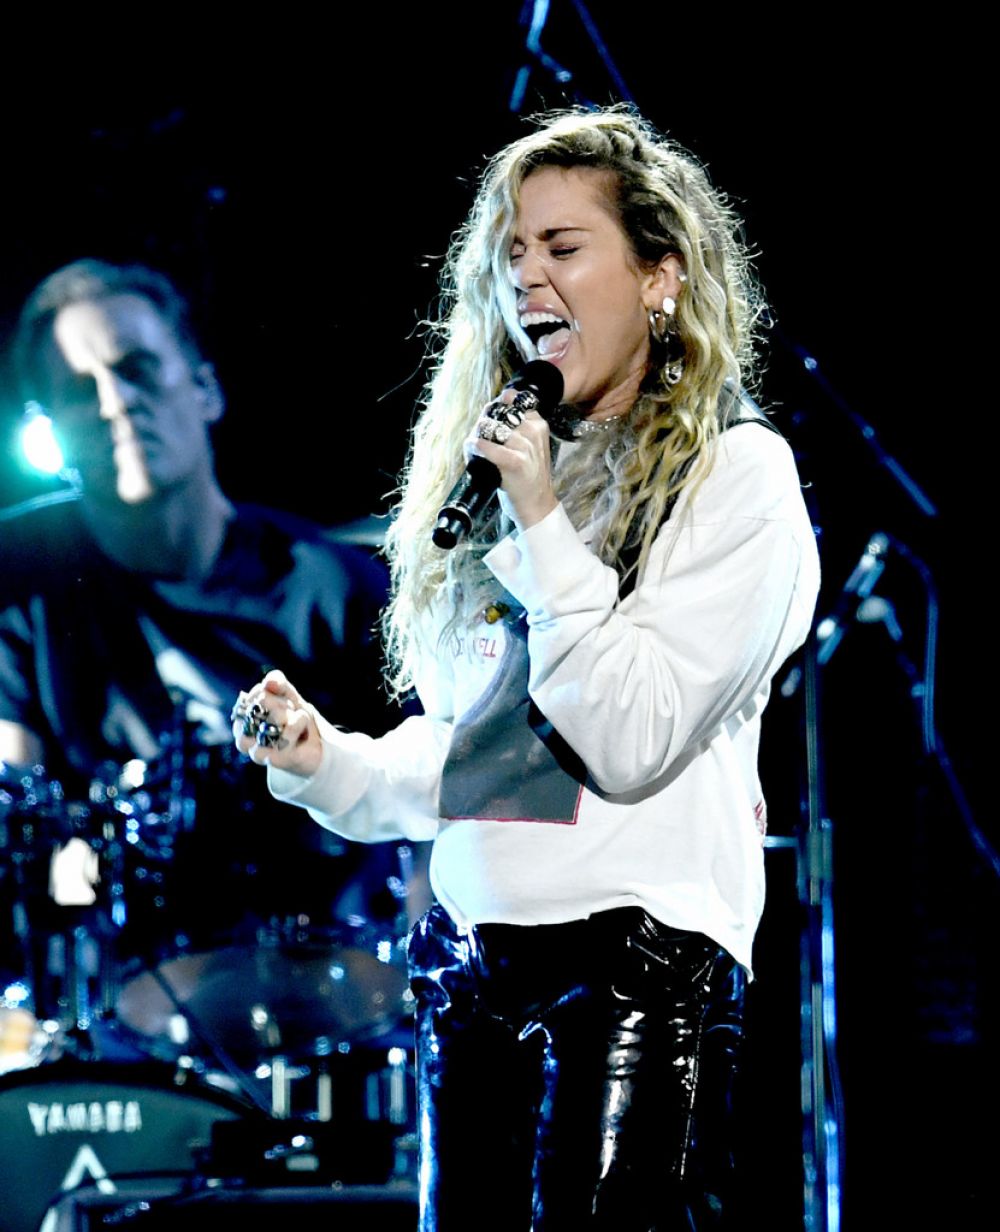 miley-cyrus-performs-i-am-the-highway-a-tribute-to-chris-cornell-concert-in-inglewood-01-16-2019-5.jpg